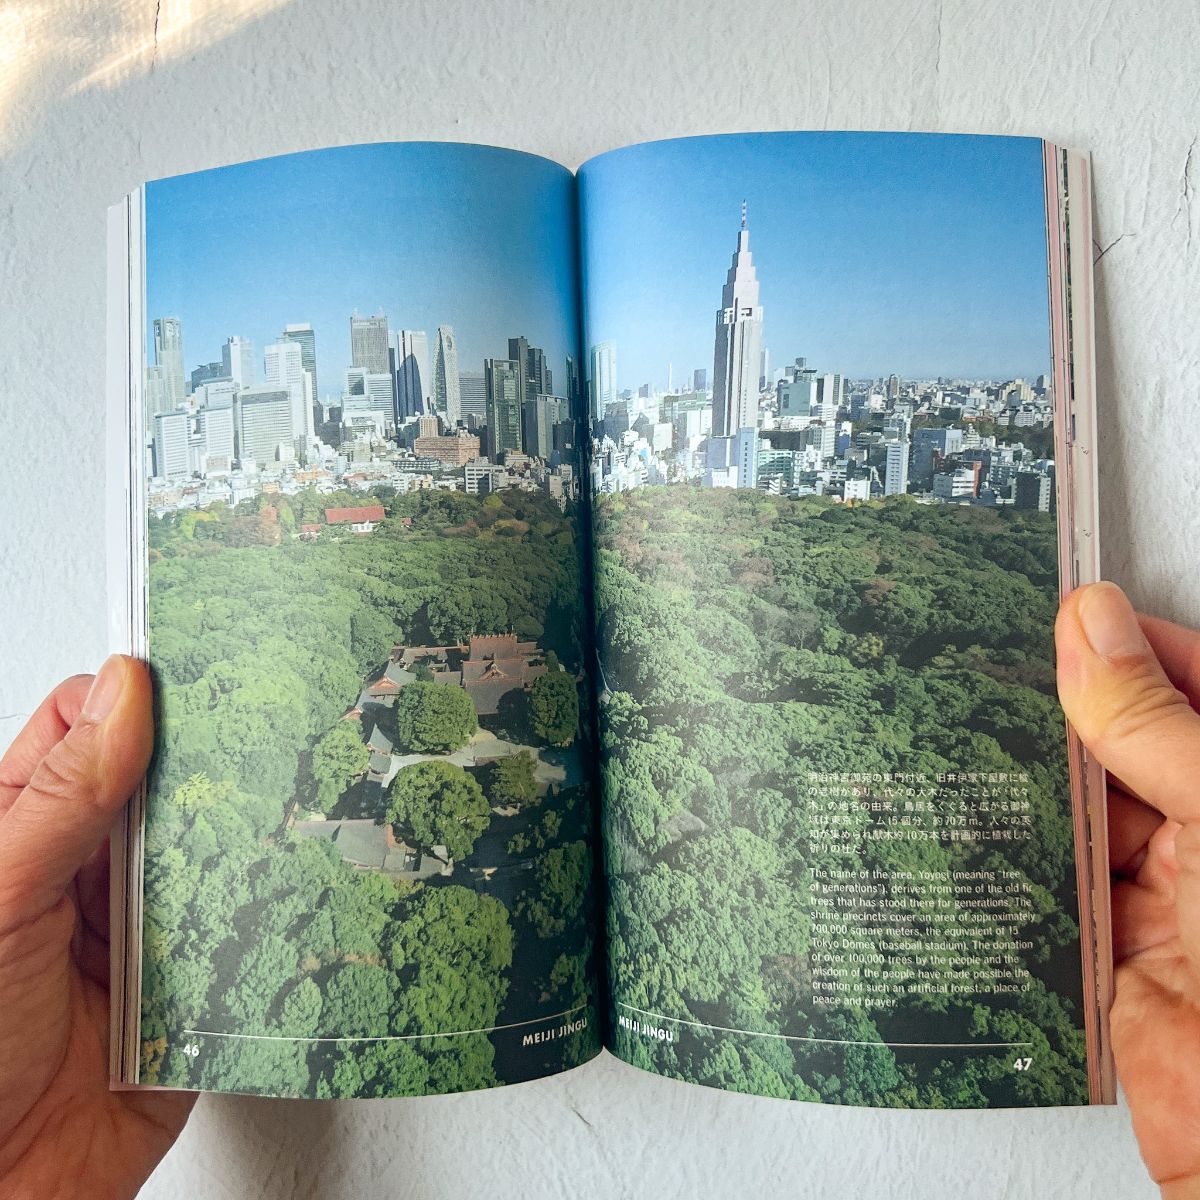 Tokyo Guide Book "TOKYO ARTRIP | Shinto Shrines and Buddhist Temples"Nagamochi Shop